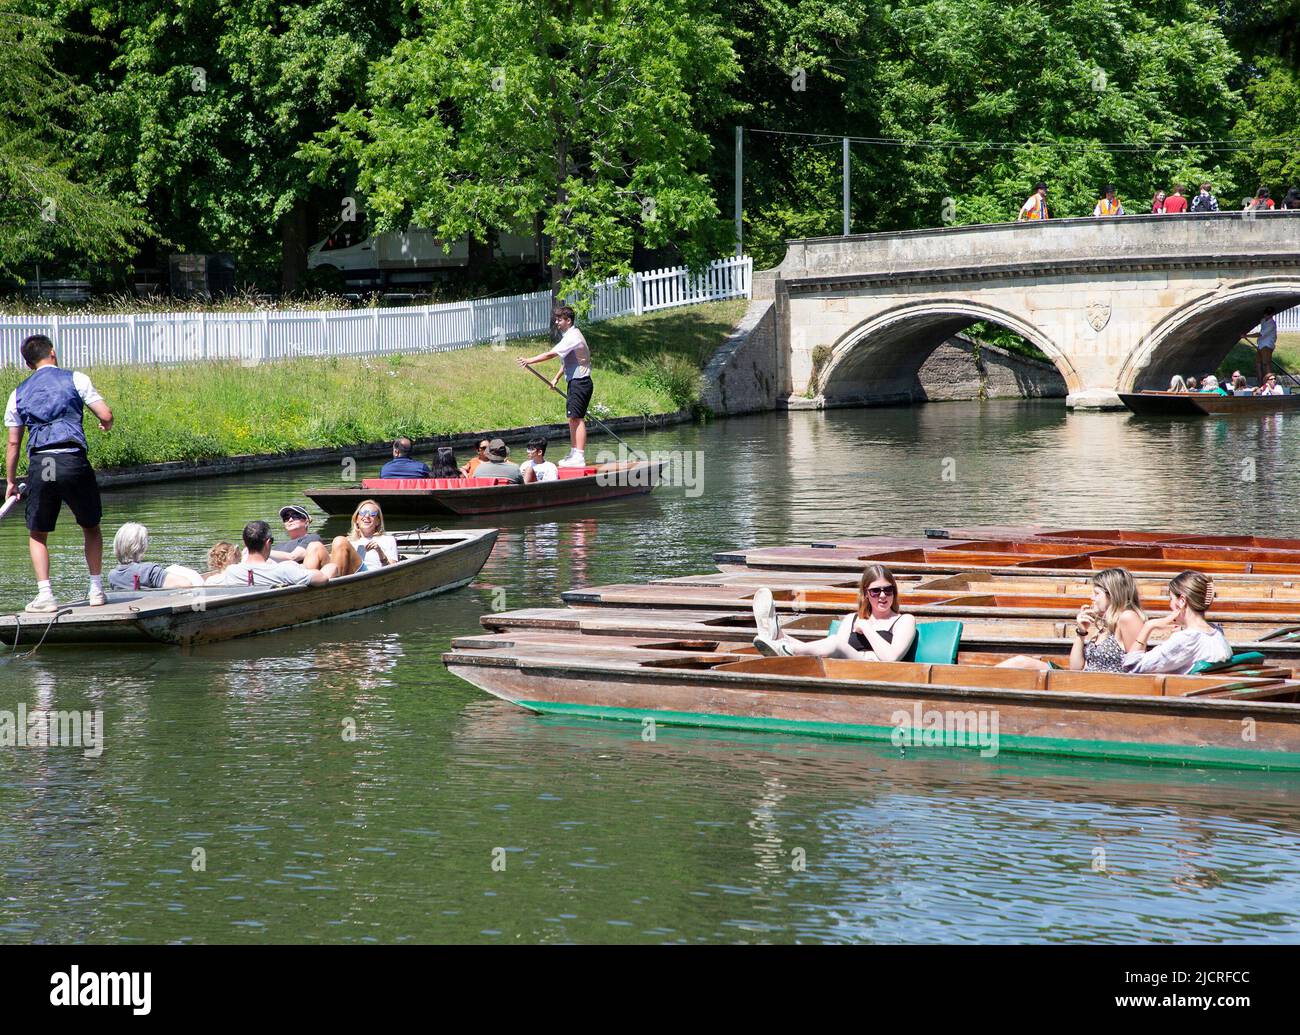 Cambridge,UK 15th June June 2022. Tourists and students enjoy the hot weather punting on the River Cam in Cambridge. Credit: Jason Mitchell/Alamy Live News. Stock Photo